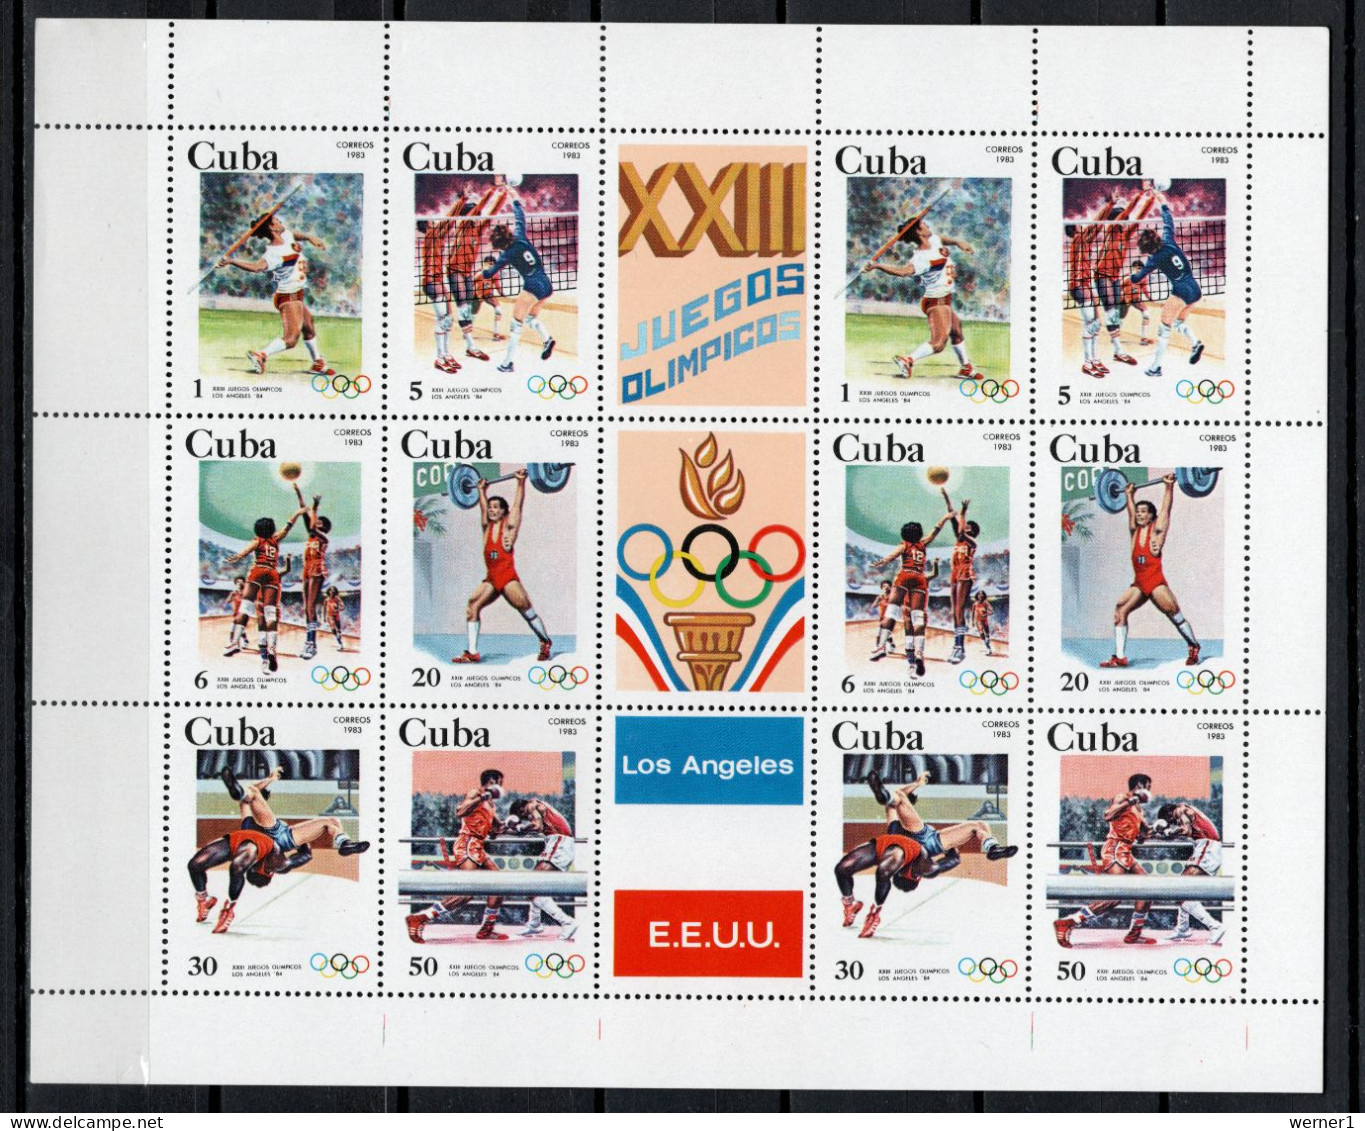 Cuba 1983 Olympic Games Los Angeles, Javelin, Volleyball, Basketball, Wrestling Etc. Sheetlet MNH - Ete 1984: Los Angeles